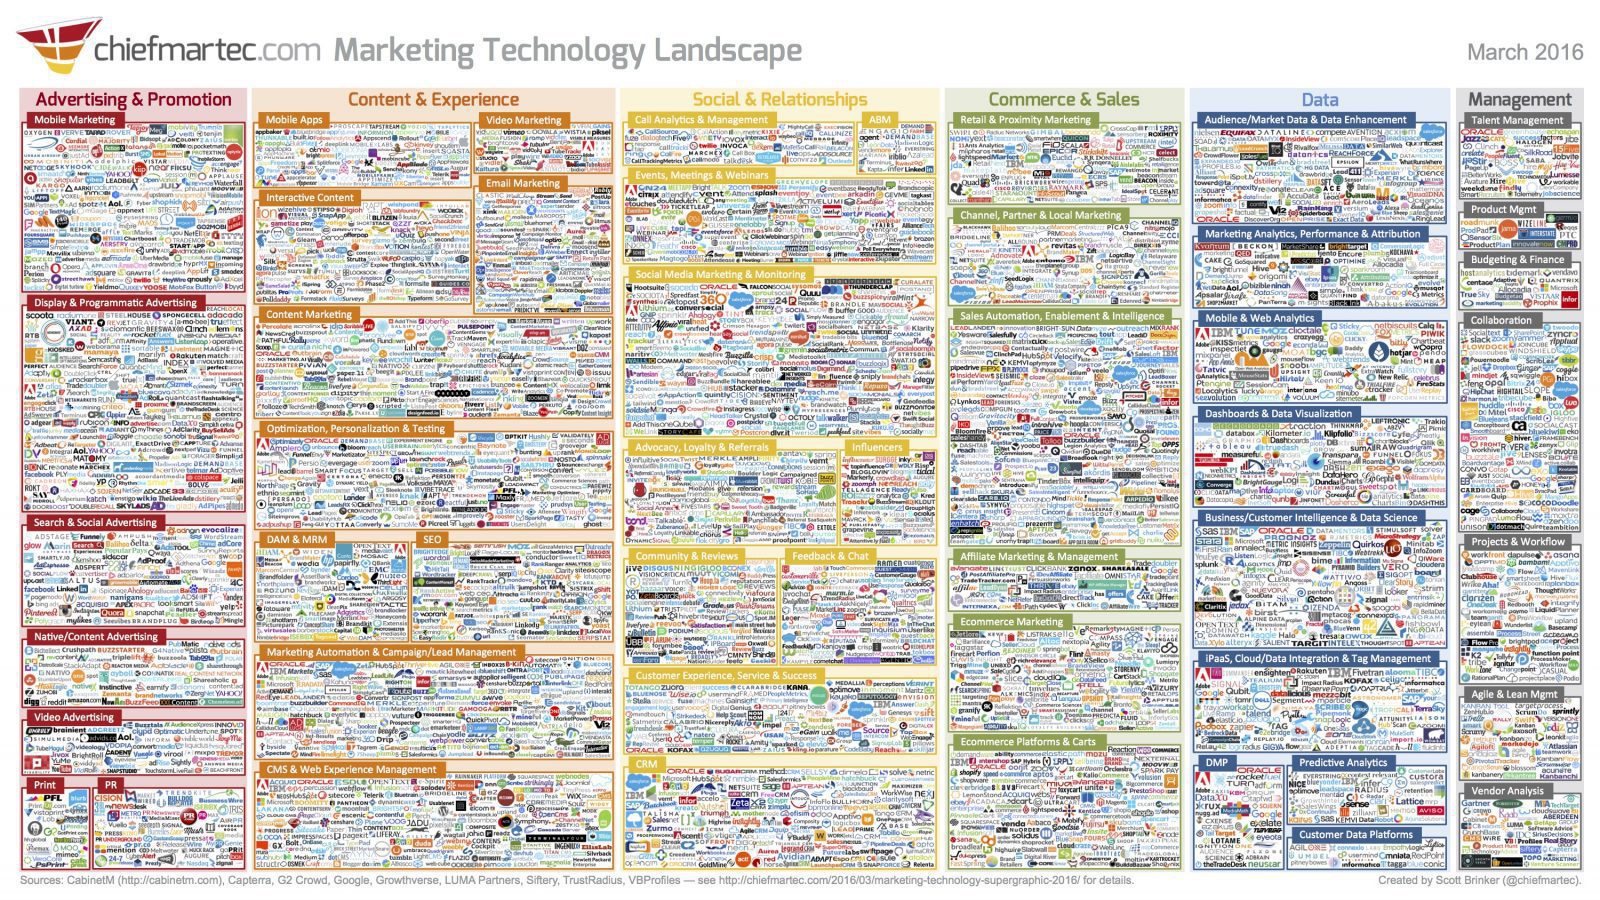 Eight keys to selecting and succeeding with marketing technology #martech